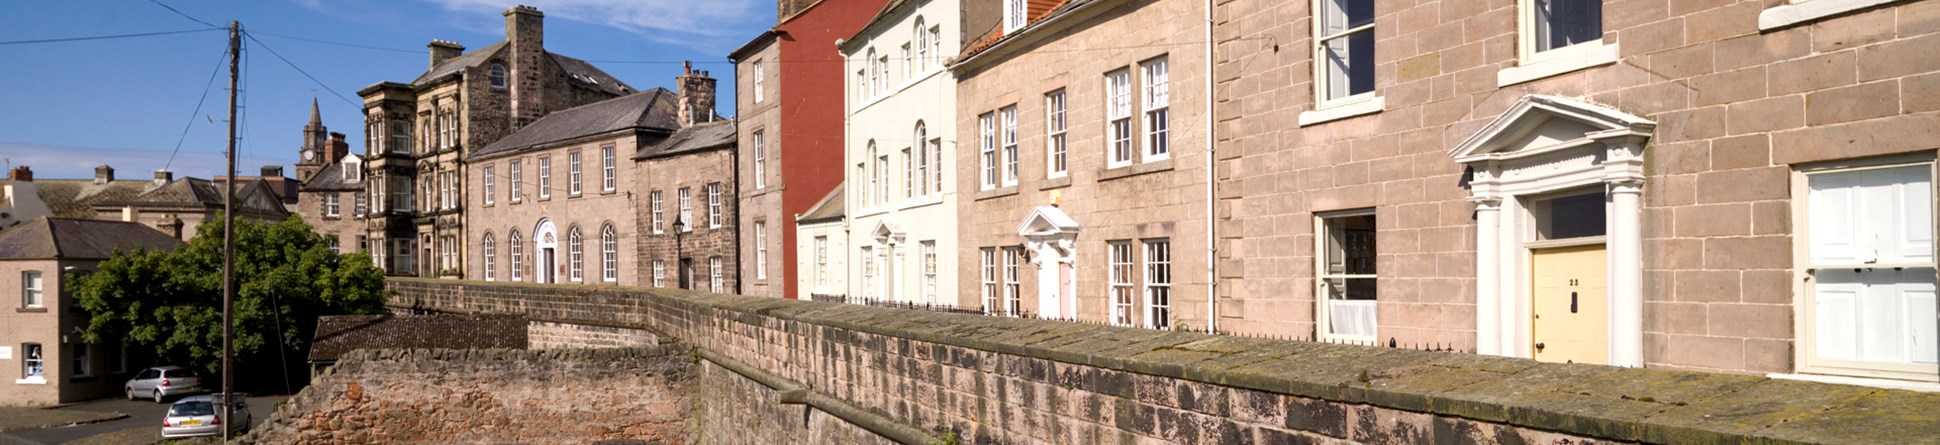 View of houses along quay walls in Berwick-upon-Tweed.